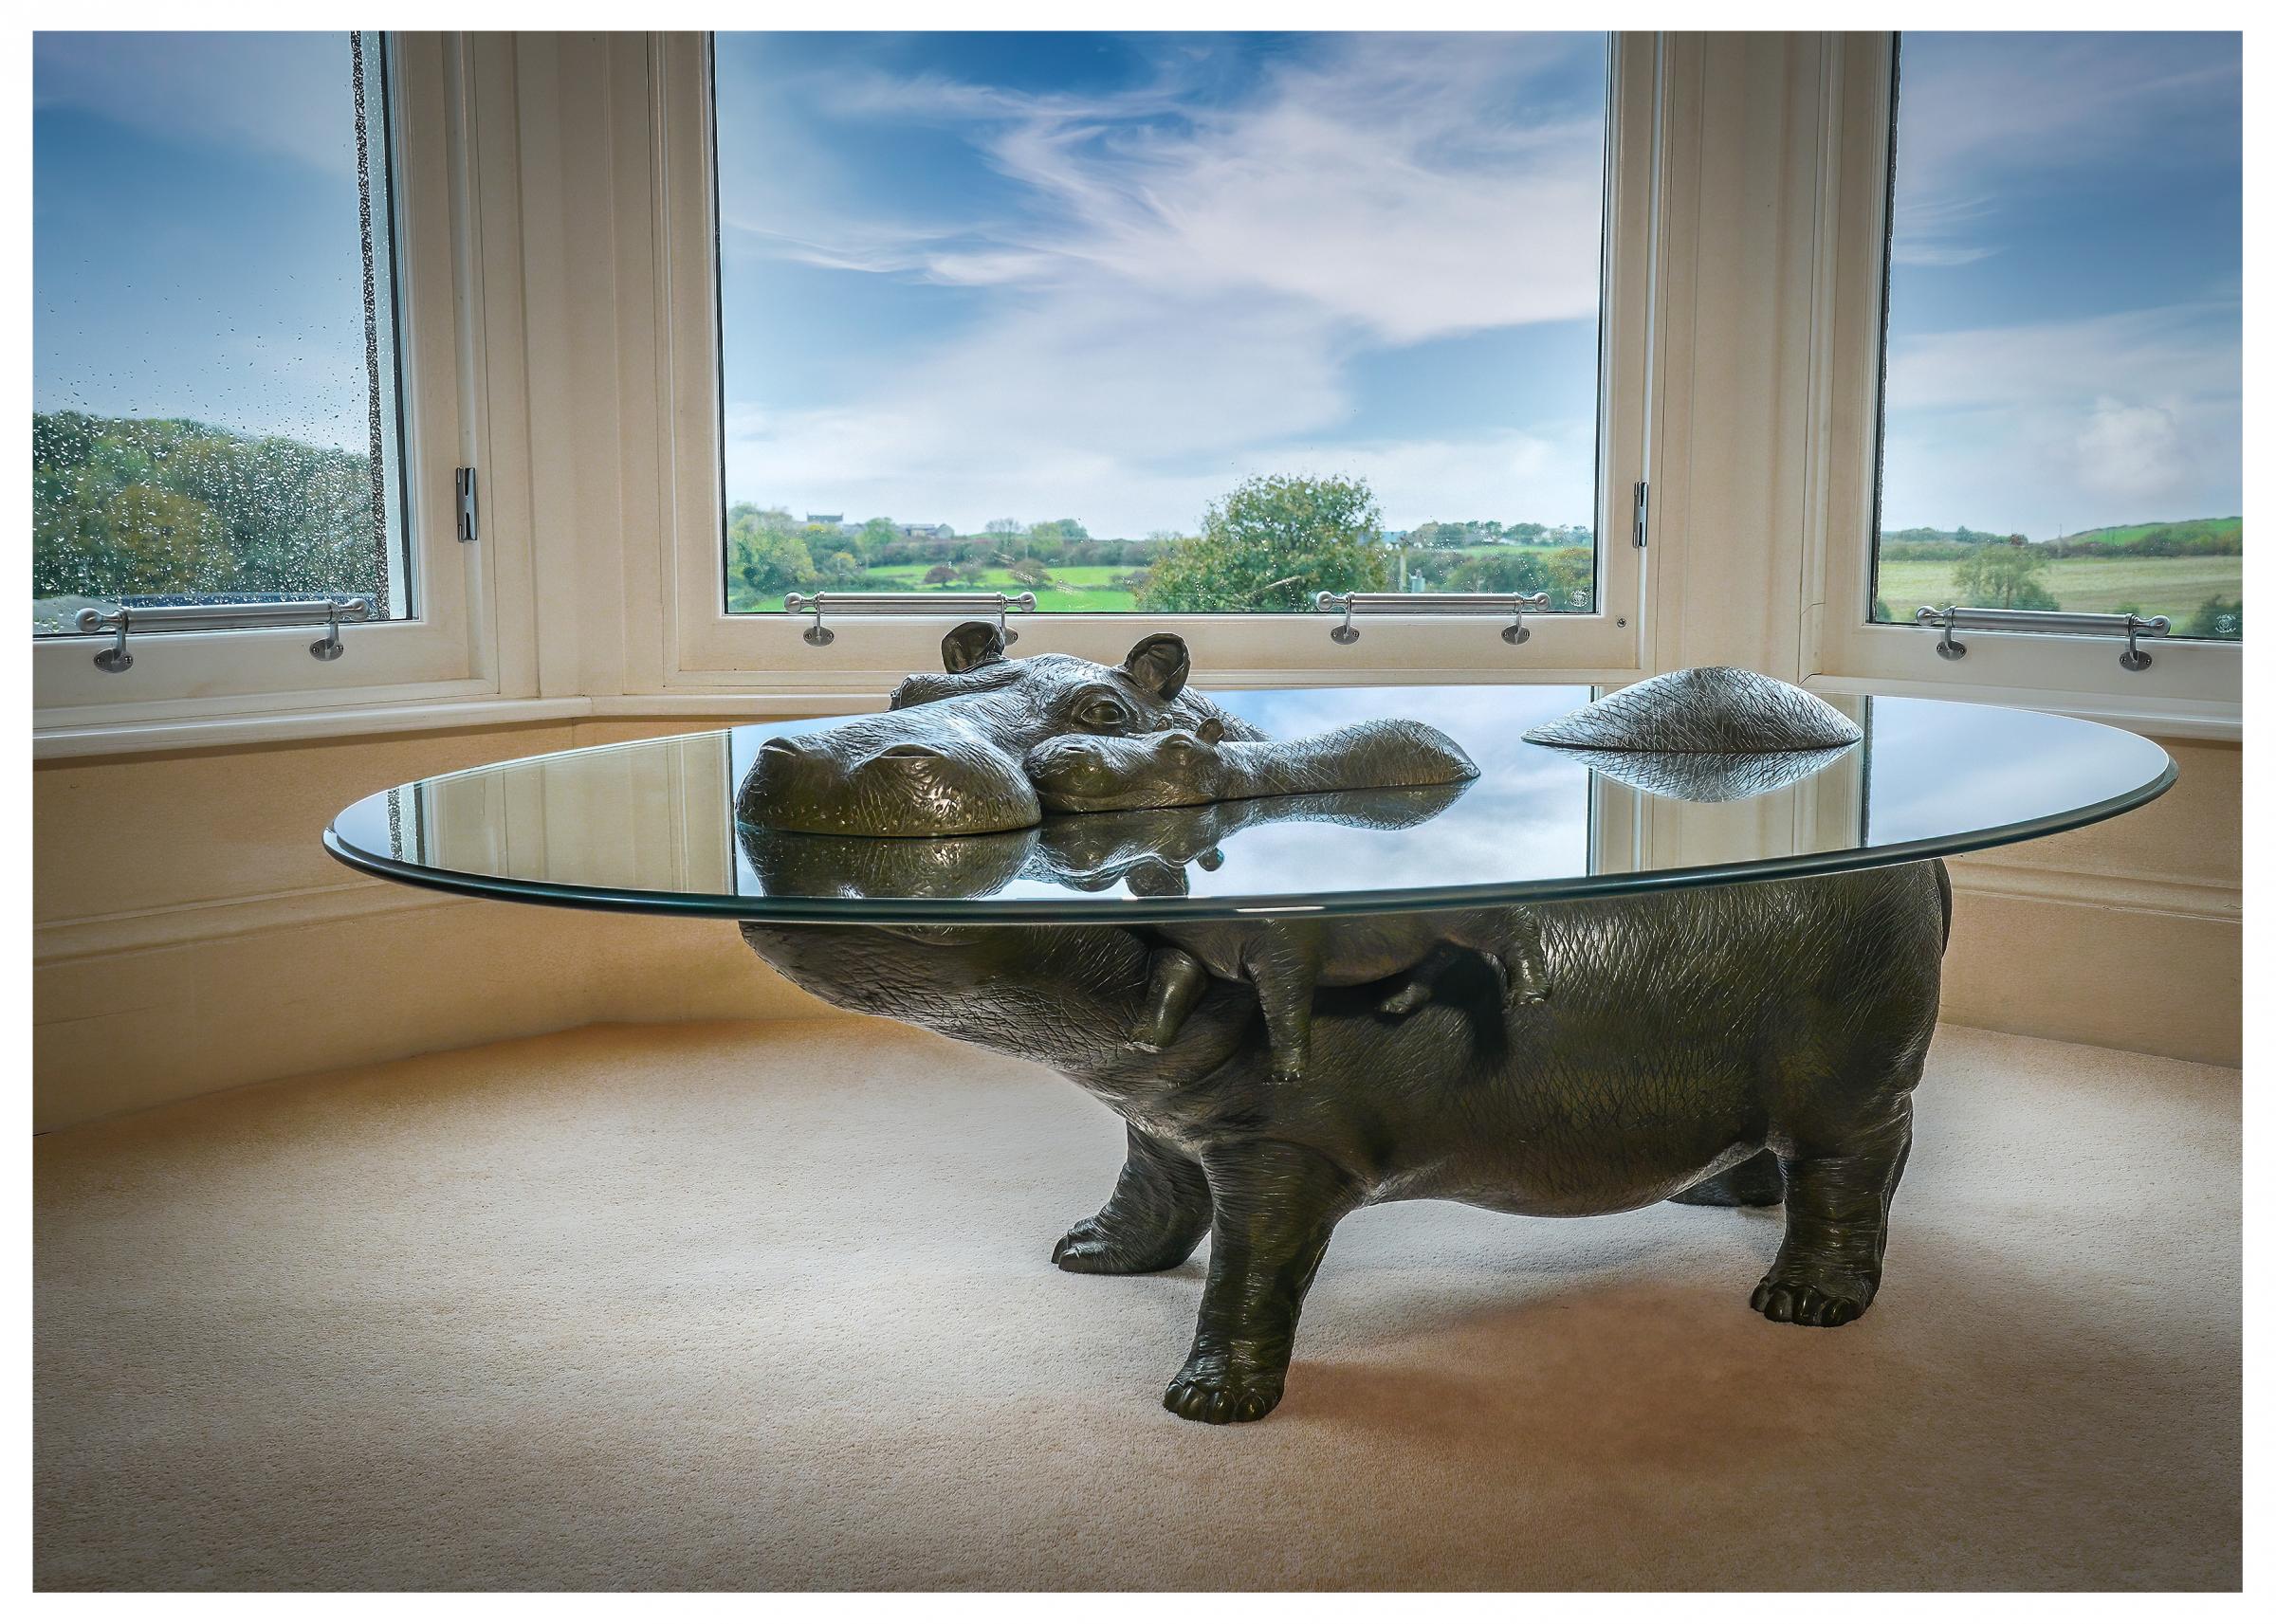 Hostage Hippo table was a raffle prize donated by Mark Stoddart